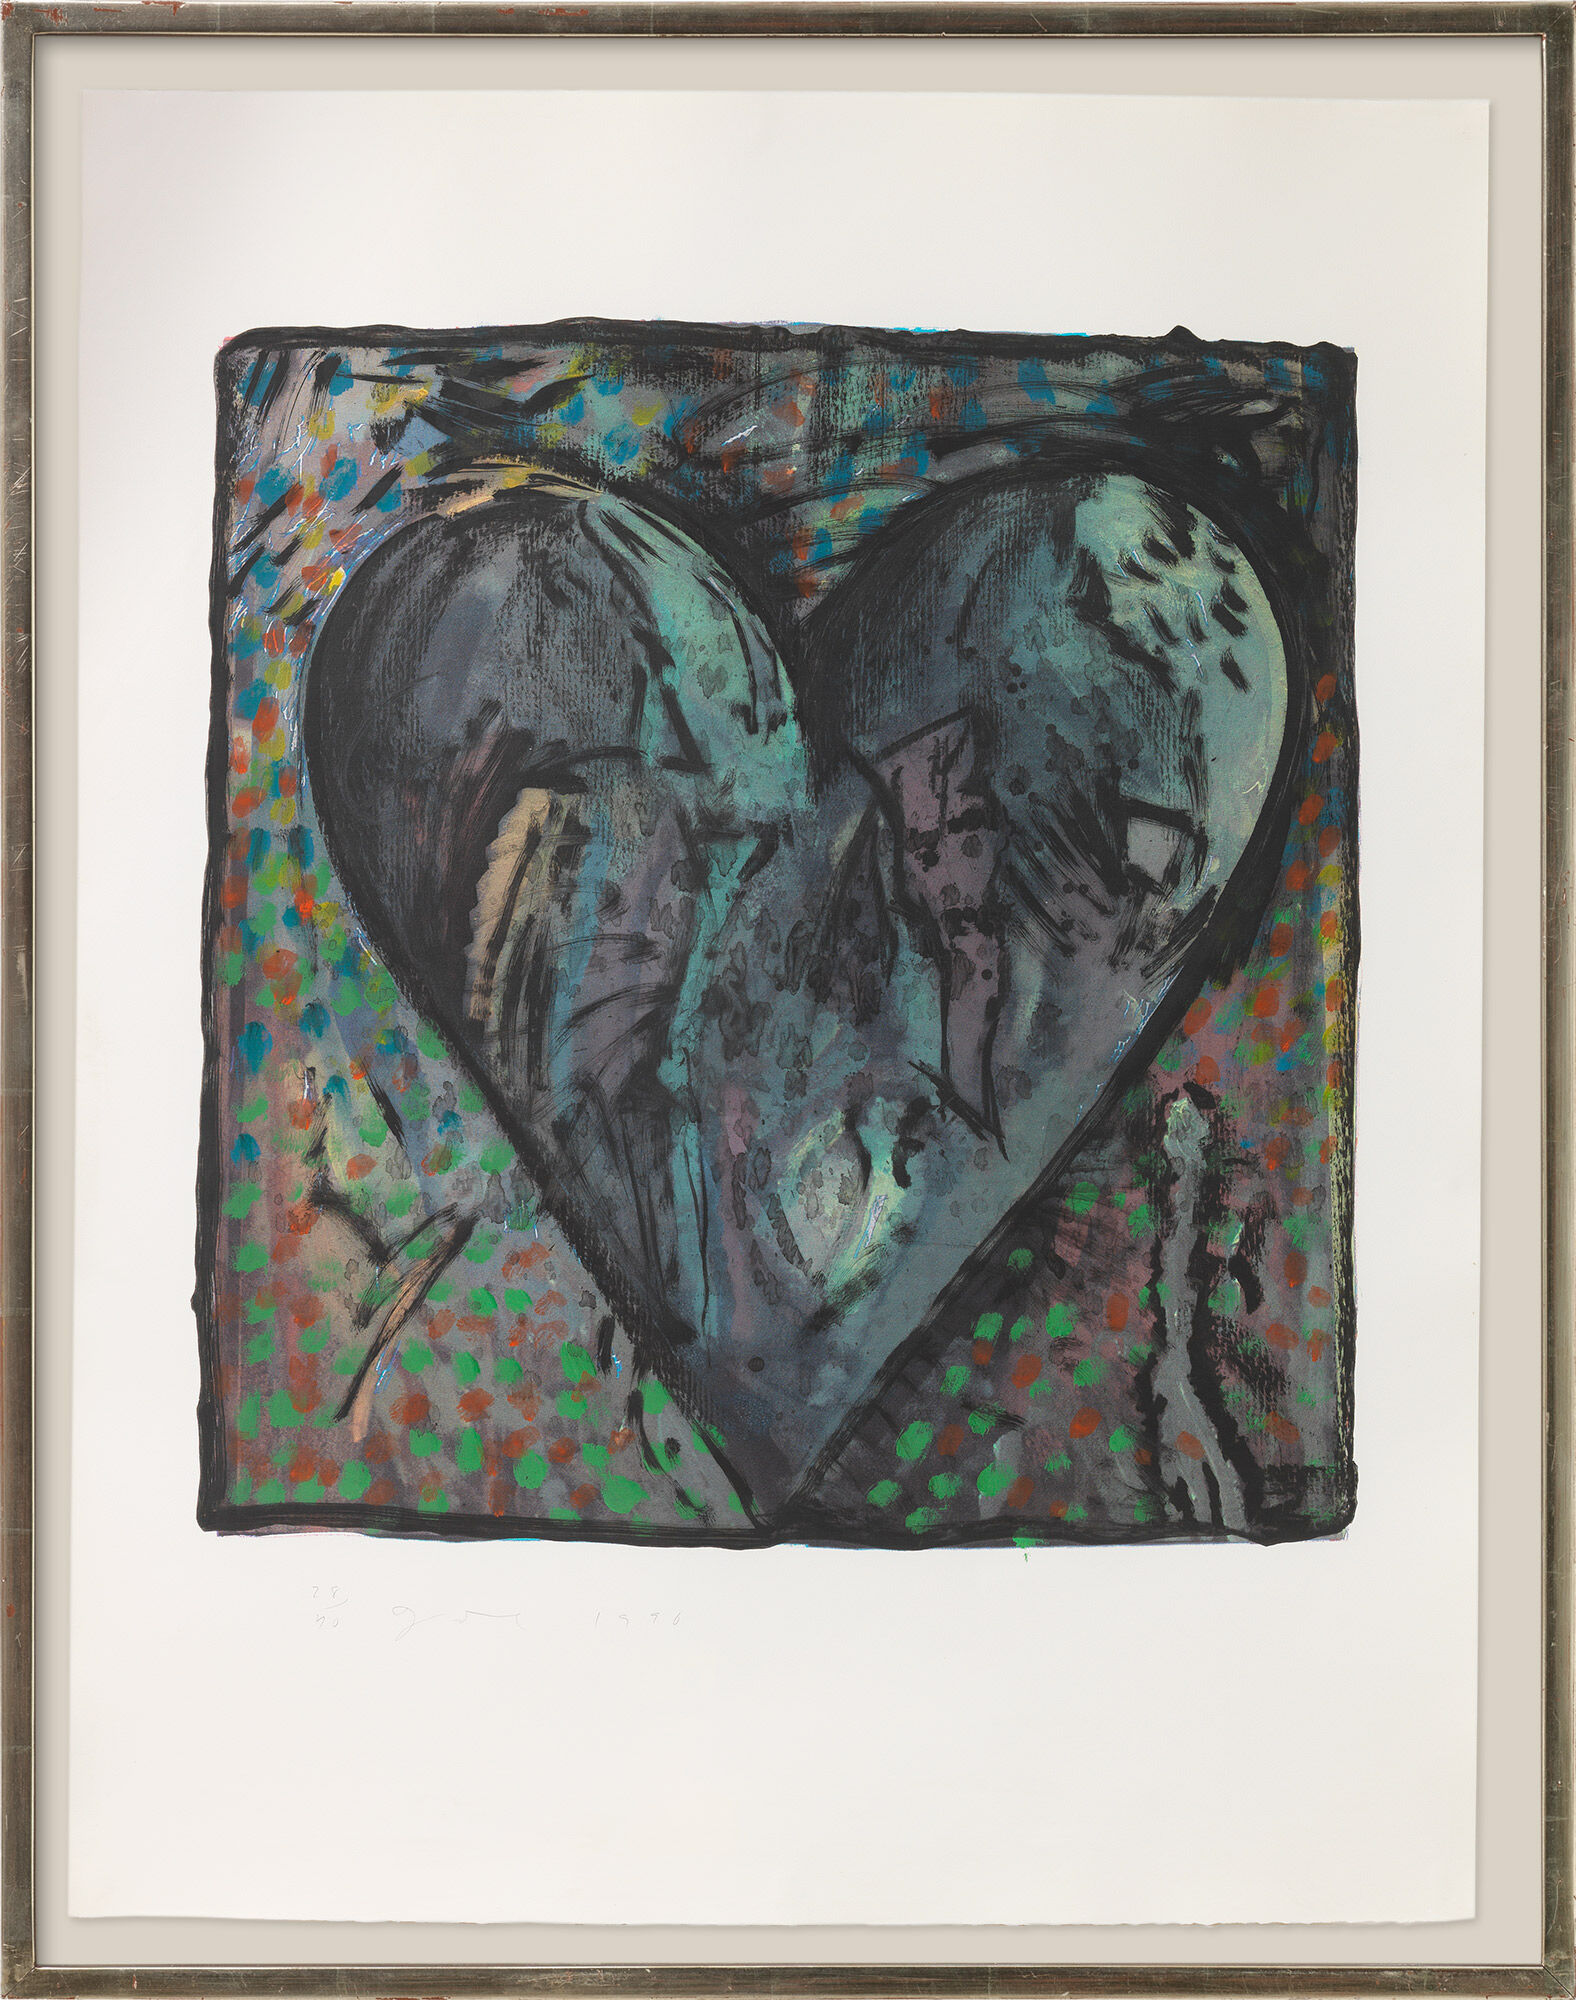 Picture "The Hand-Coloured Viennese Hearts VI" (1990) by Jim Dine